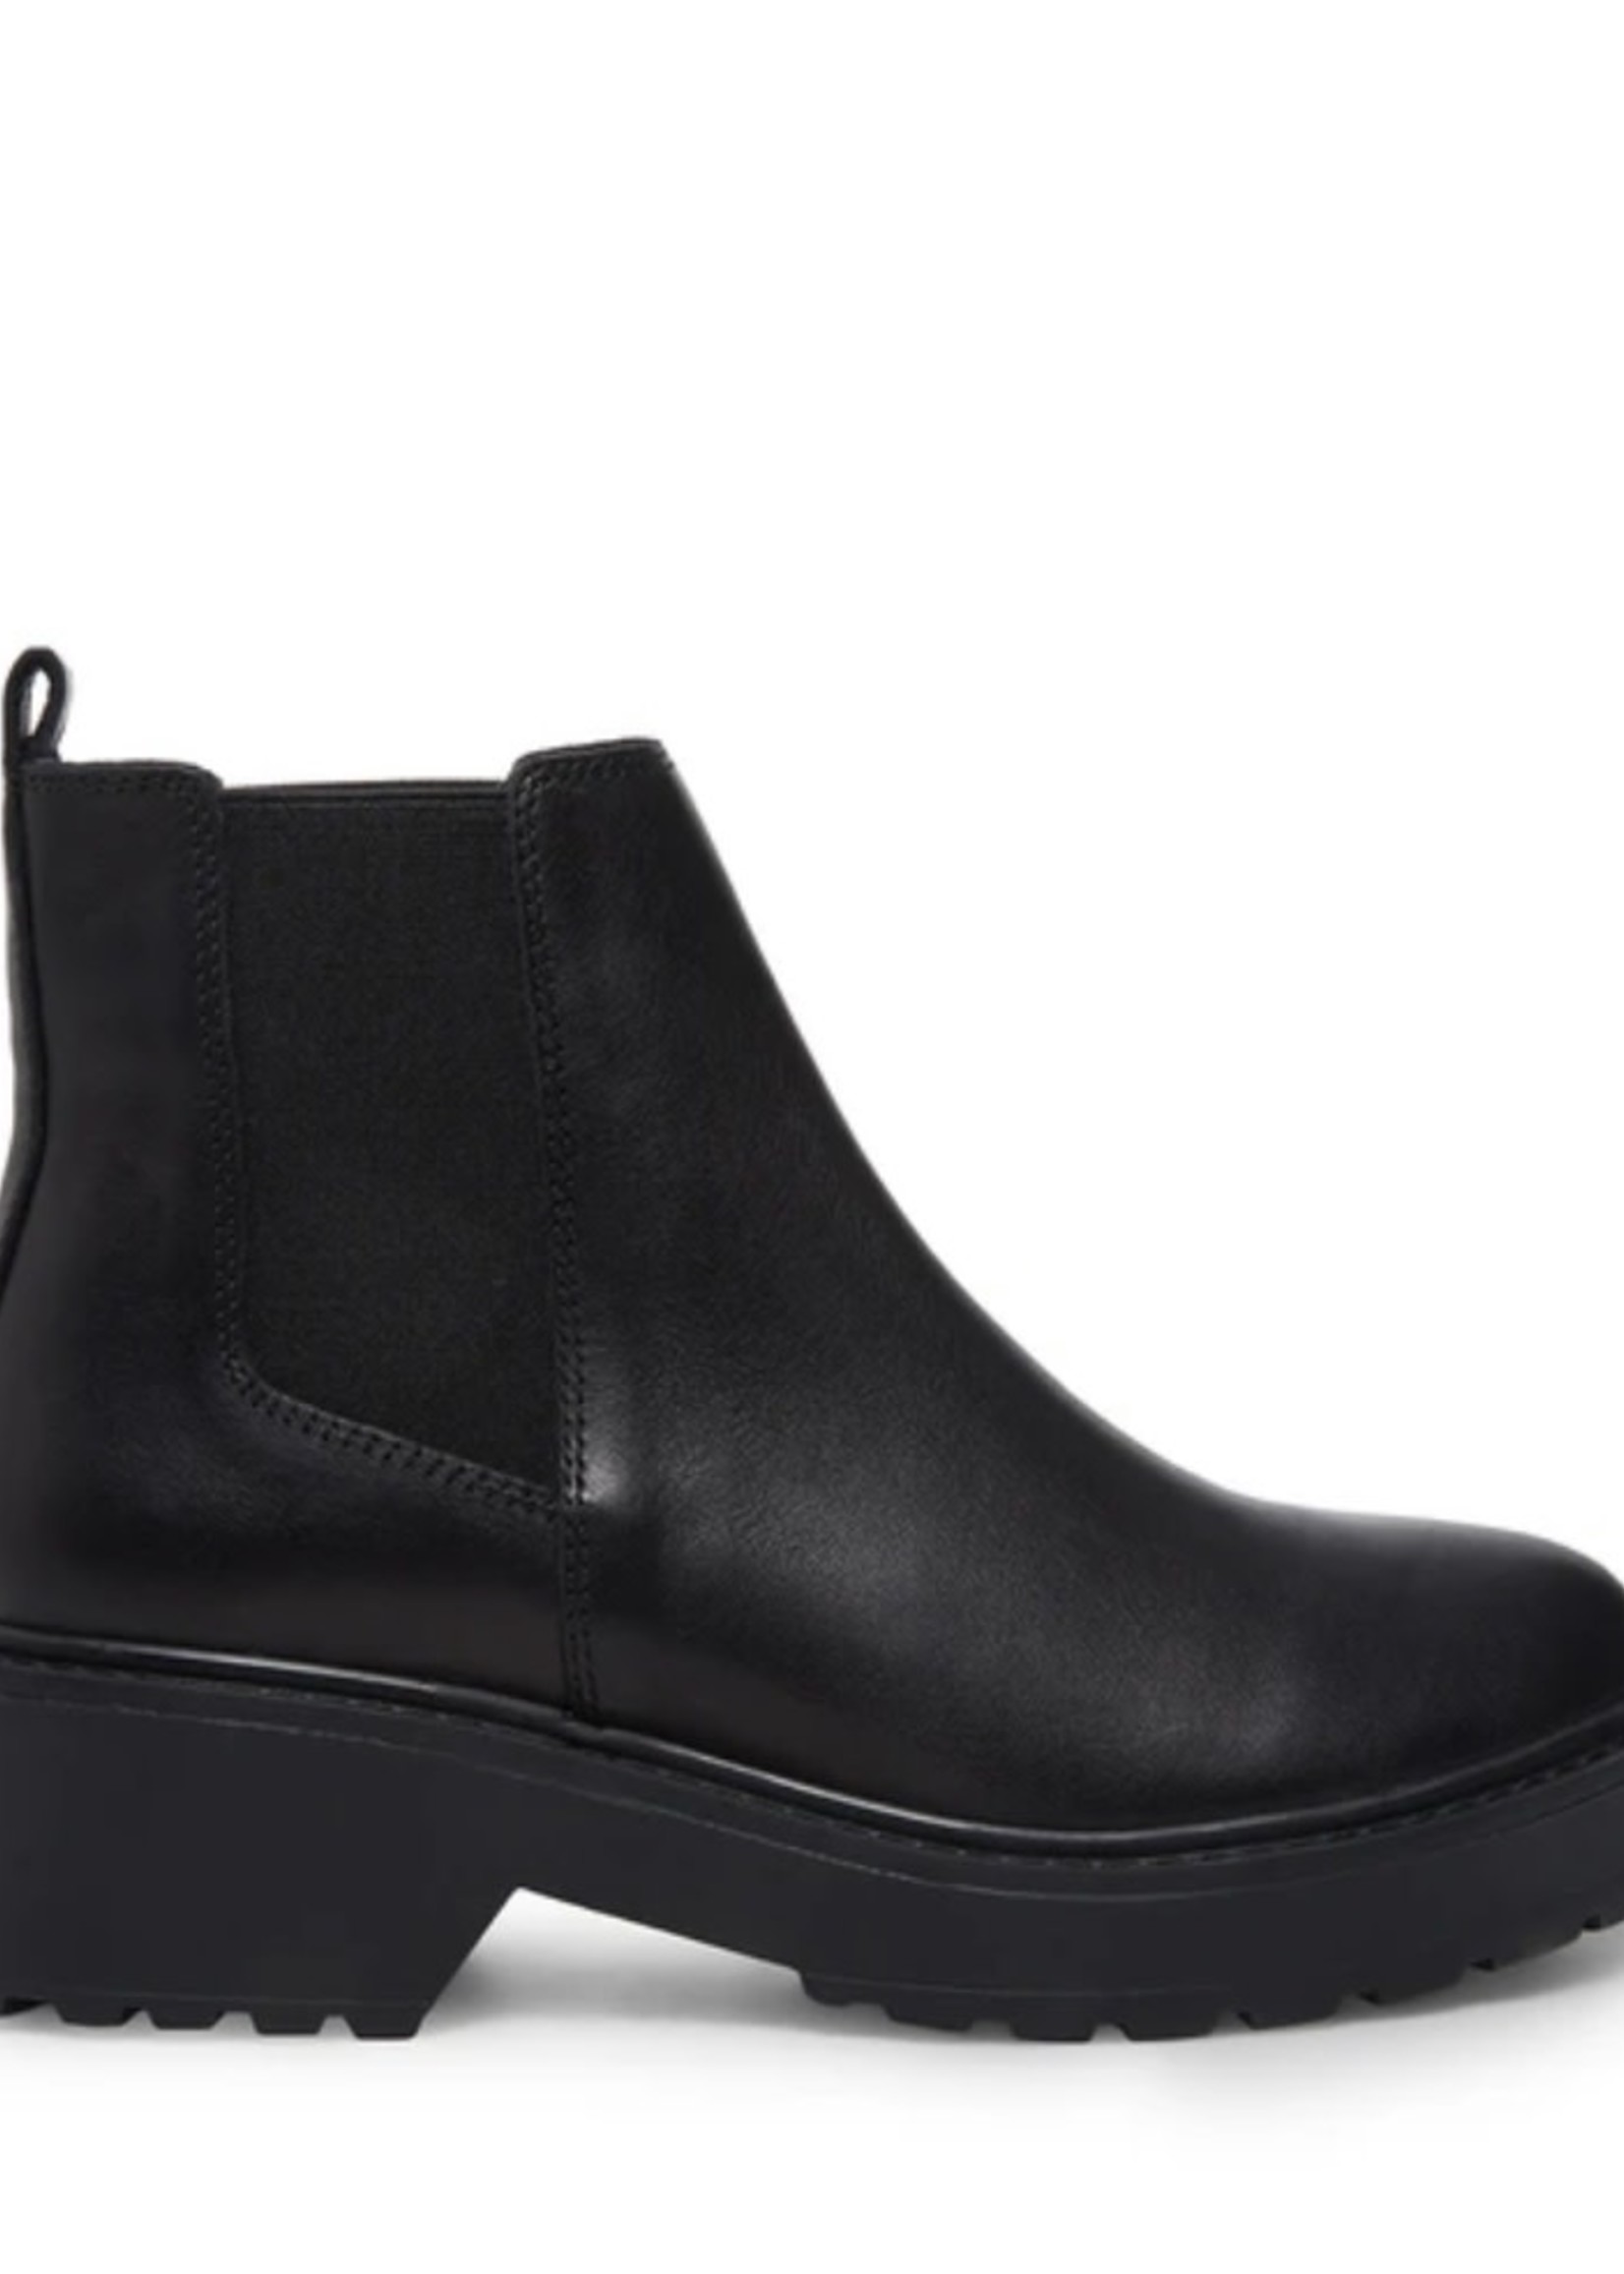 STEVE MADDEN The Tyclone Boot